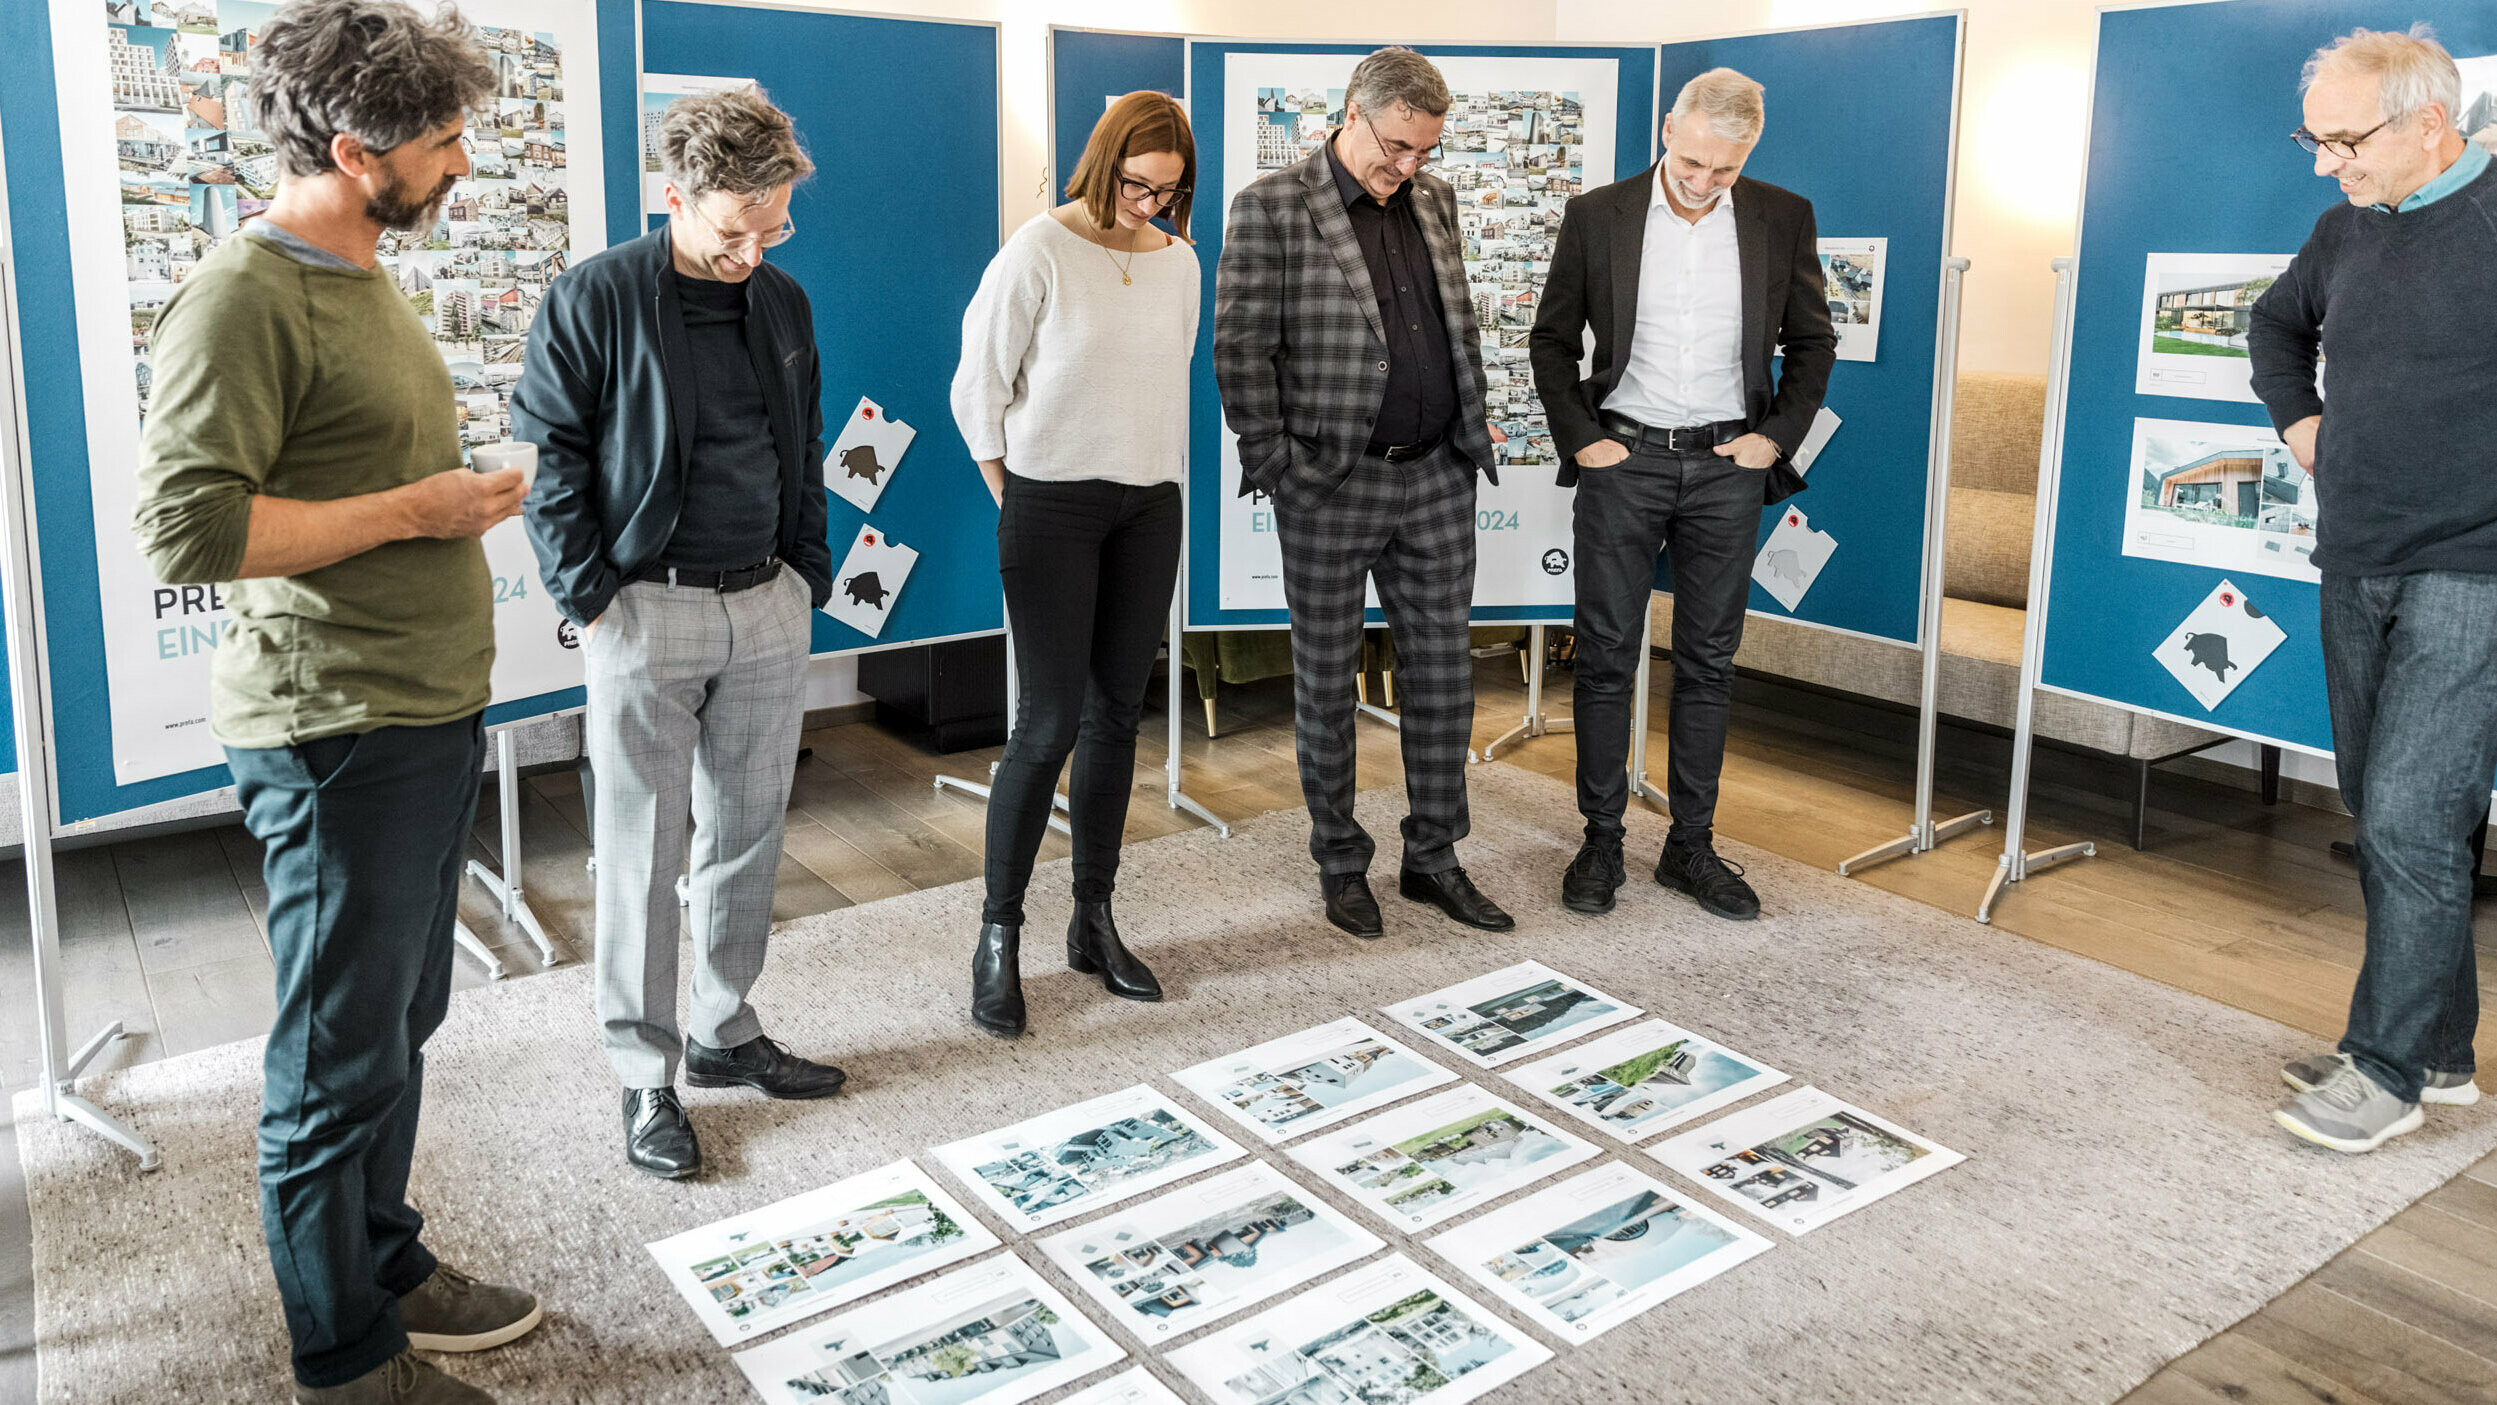 The participants of the PREFARENZEN dialogue discussing the projects, the project sheets are lying on the floor. 